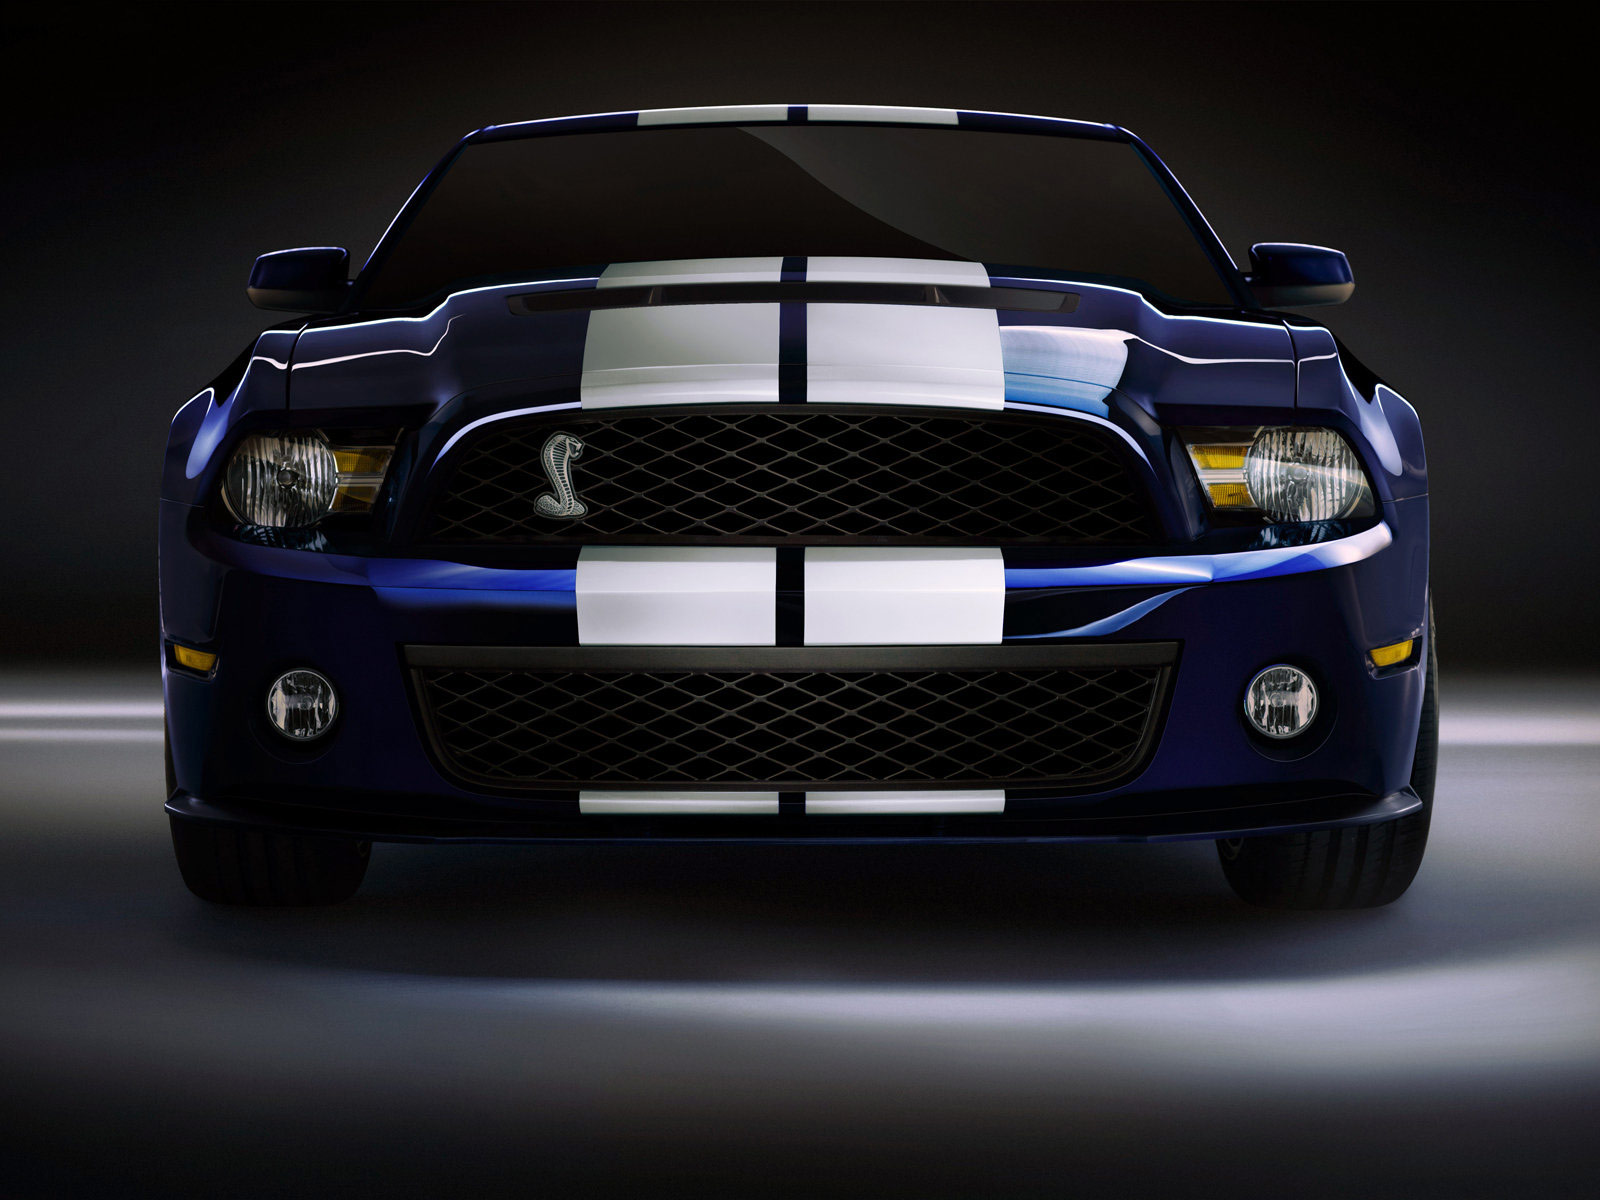 2010 FORD Mustang Shelby GT500 Car Wallpapers Auto Trends Magazine